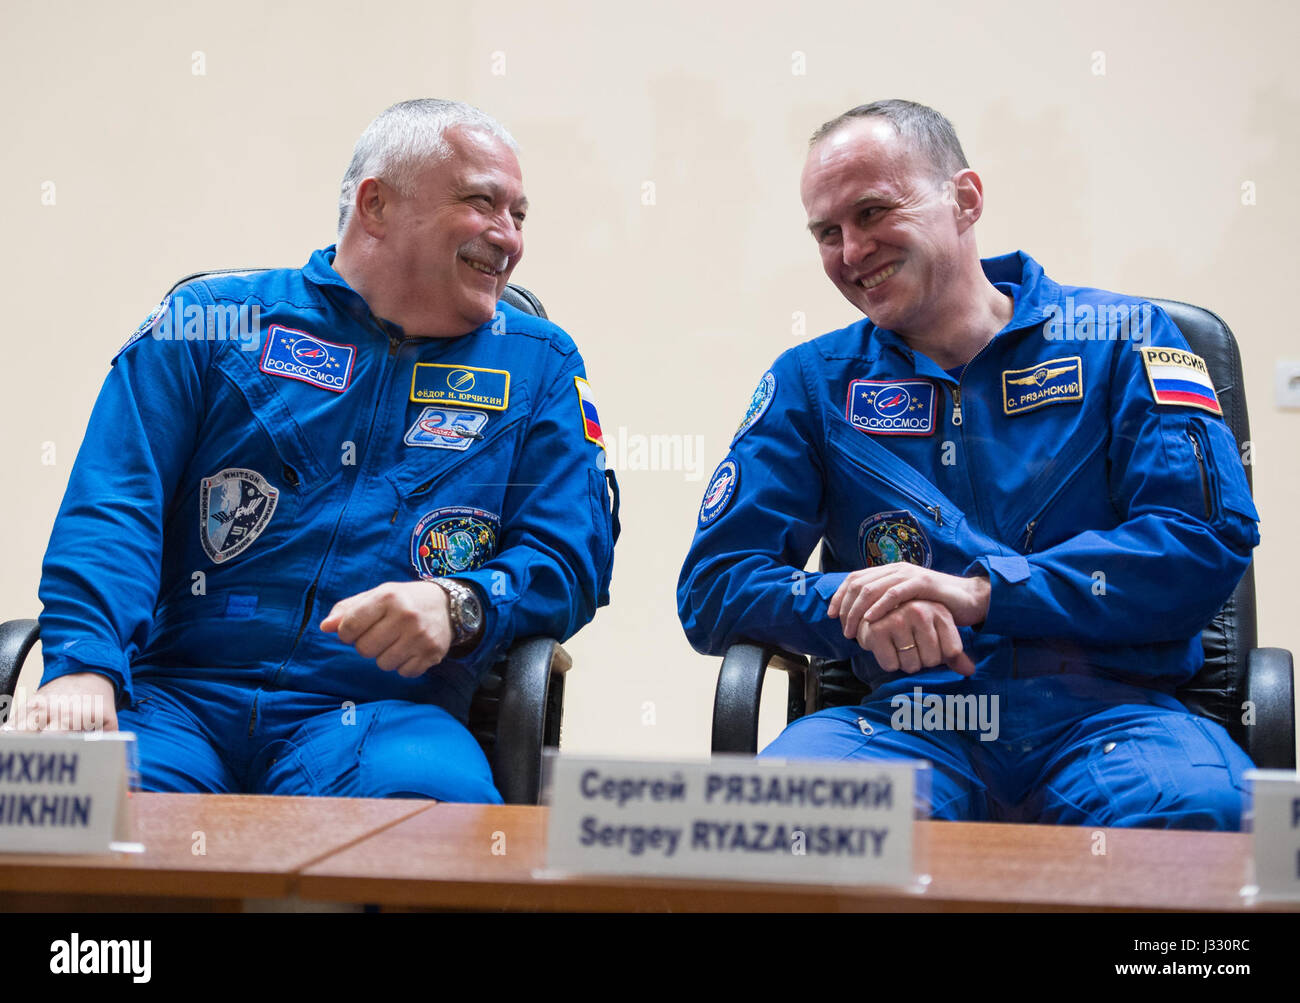 Expedition 51 prime crew member Soyuz Commander Fyodor Yurchikhin of Roscosmos, left, laughs with Expedition 51 backup crew member Sergey Ryazanskiy of Roscosmos during a press conference on Wednesday, April 19, 2017 at the Cosmonaut Hotel in Baikonur, Kazakhstan. Launch of the Soyuz rocket is scheduled for April 20 and will carry Yurchikhin and Flight Engineer Jack Fischer of NASA into orbit to begin their four and a half month mission on the International Space Station. Photo Credit: (NASA/Aubrey Gemignani). Stock Photo